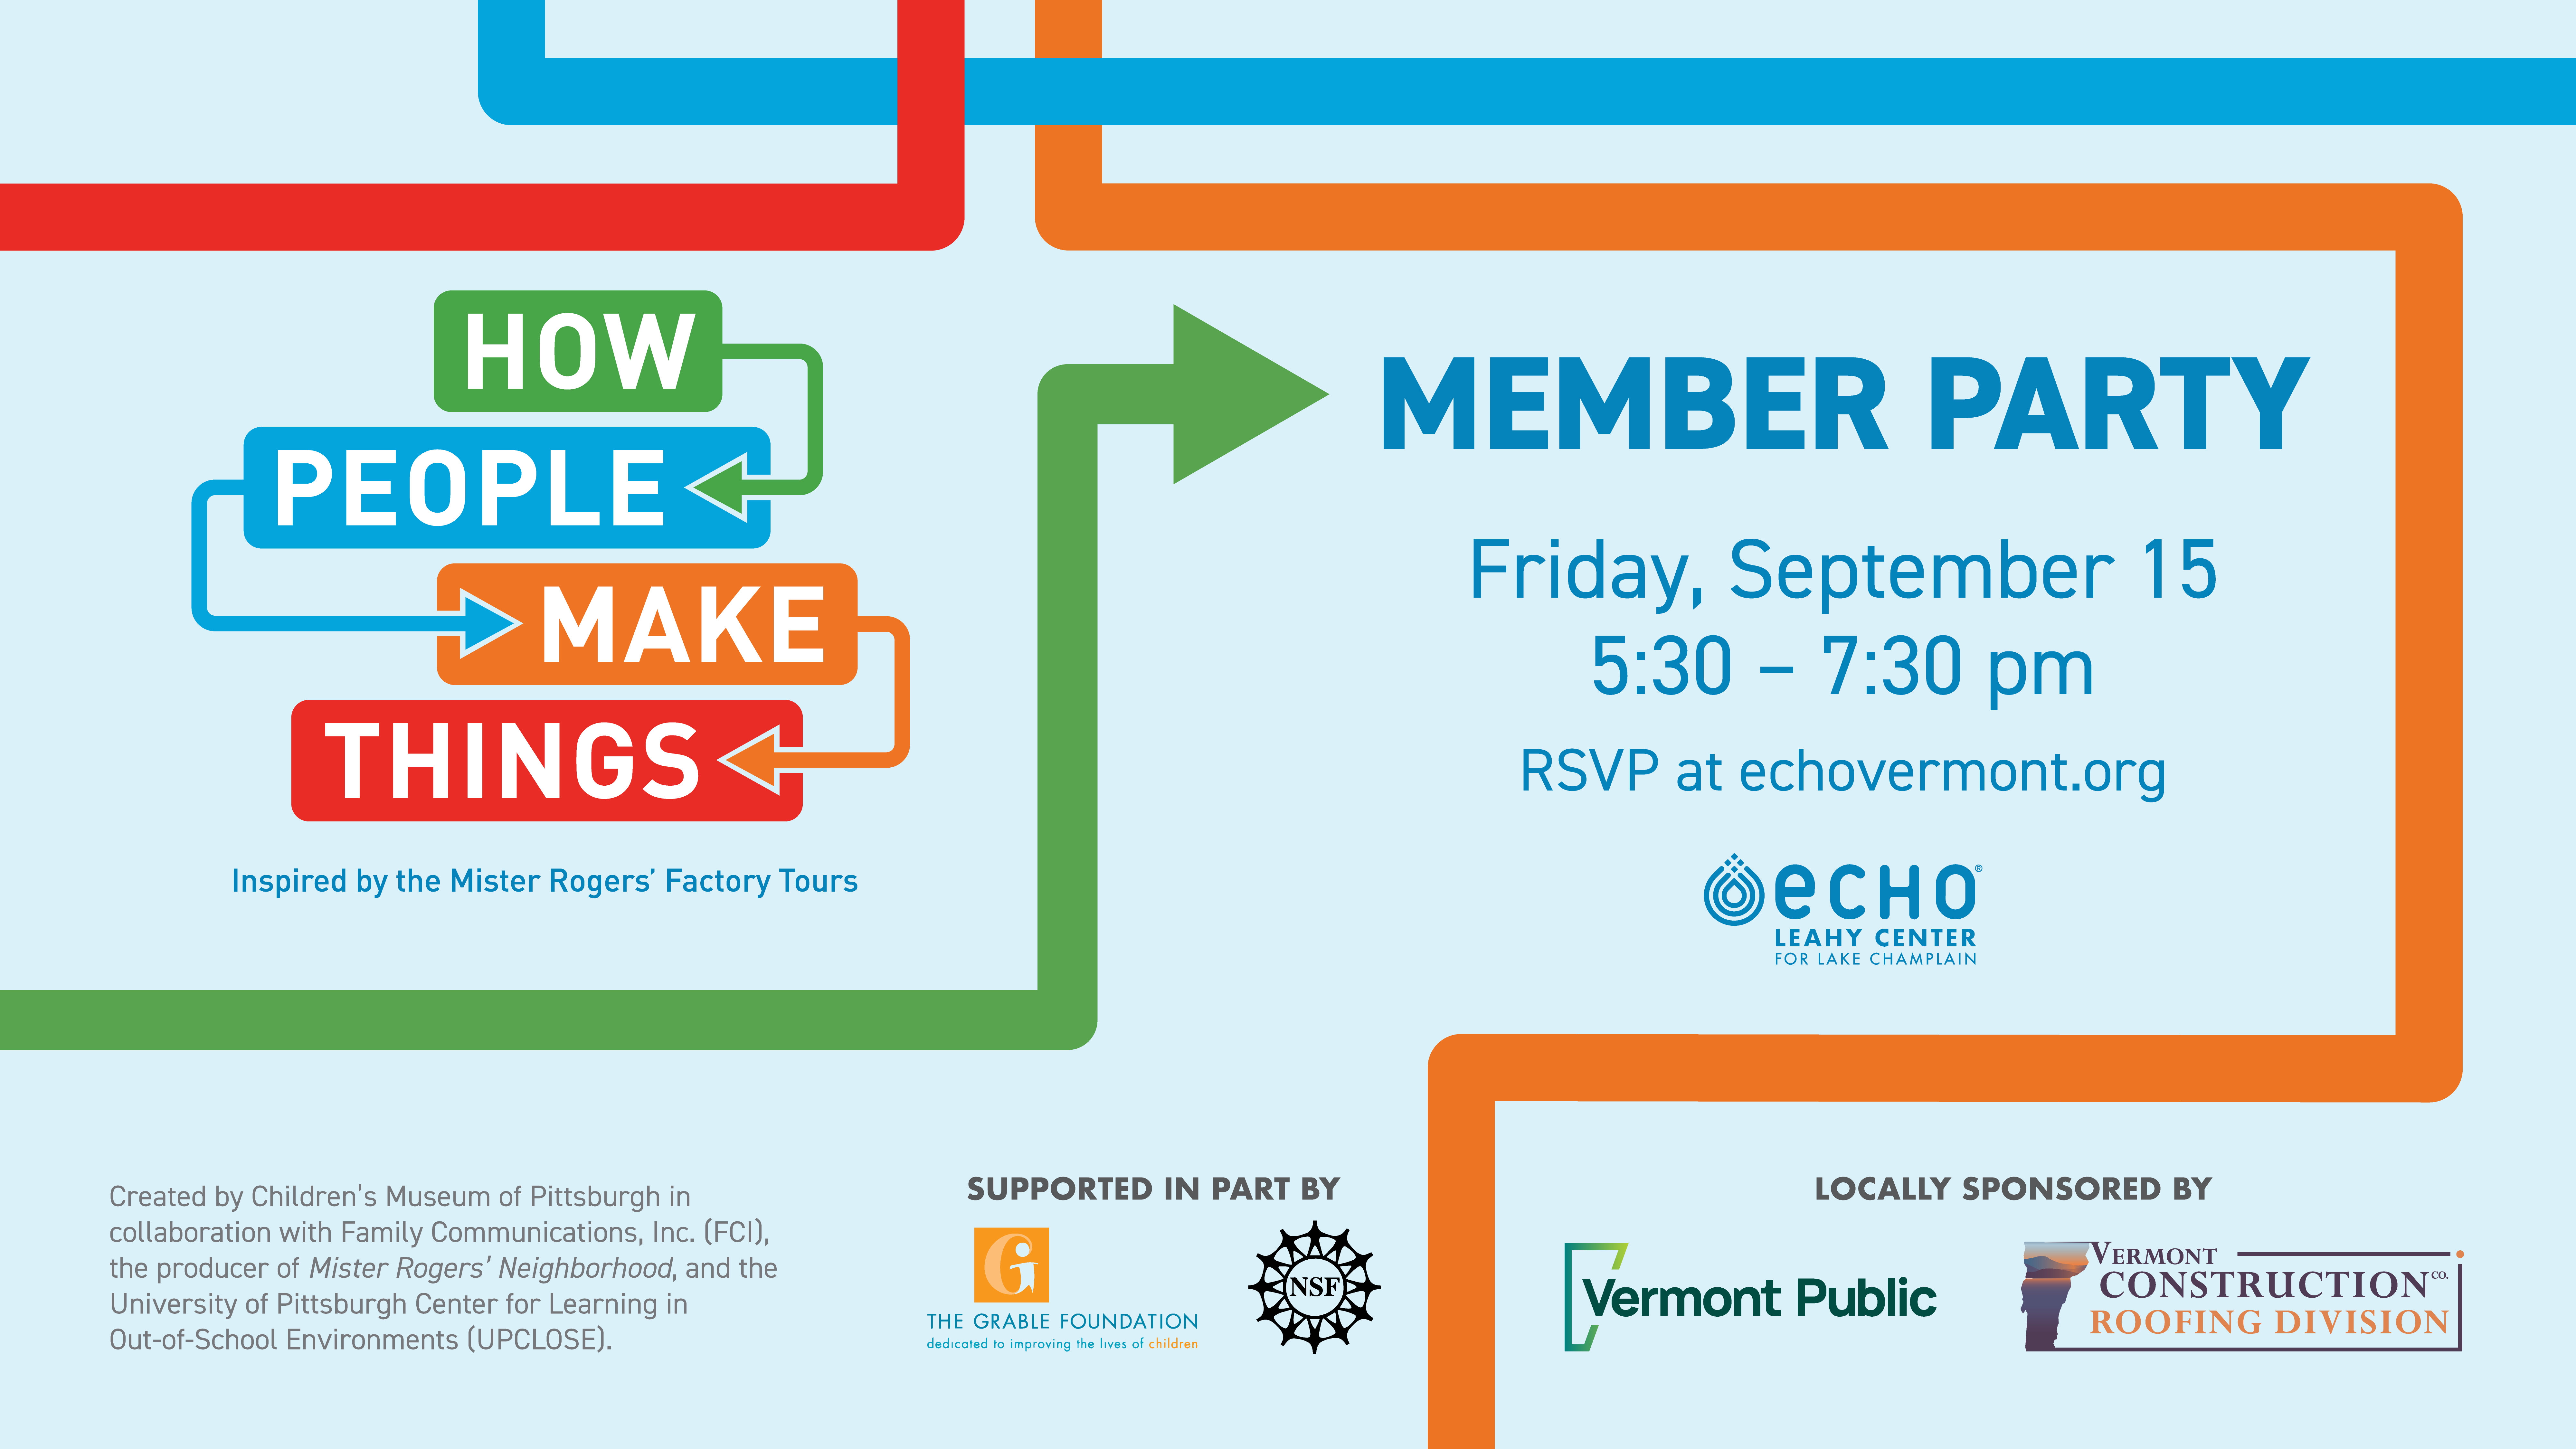 Blue graphic with multicolored arrows that reads "How People Make Things: Inspired by the Mister Rogers' Factory Tours MEMBER PARTY Friday September 15 5:30 - 7:30 pm. RSVP at echovermont.org"